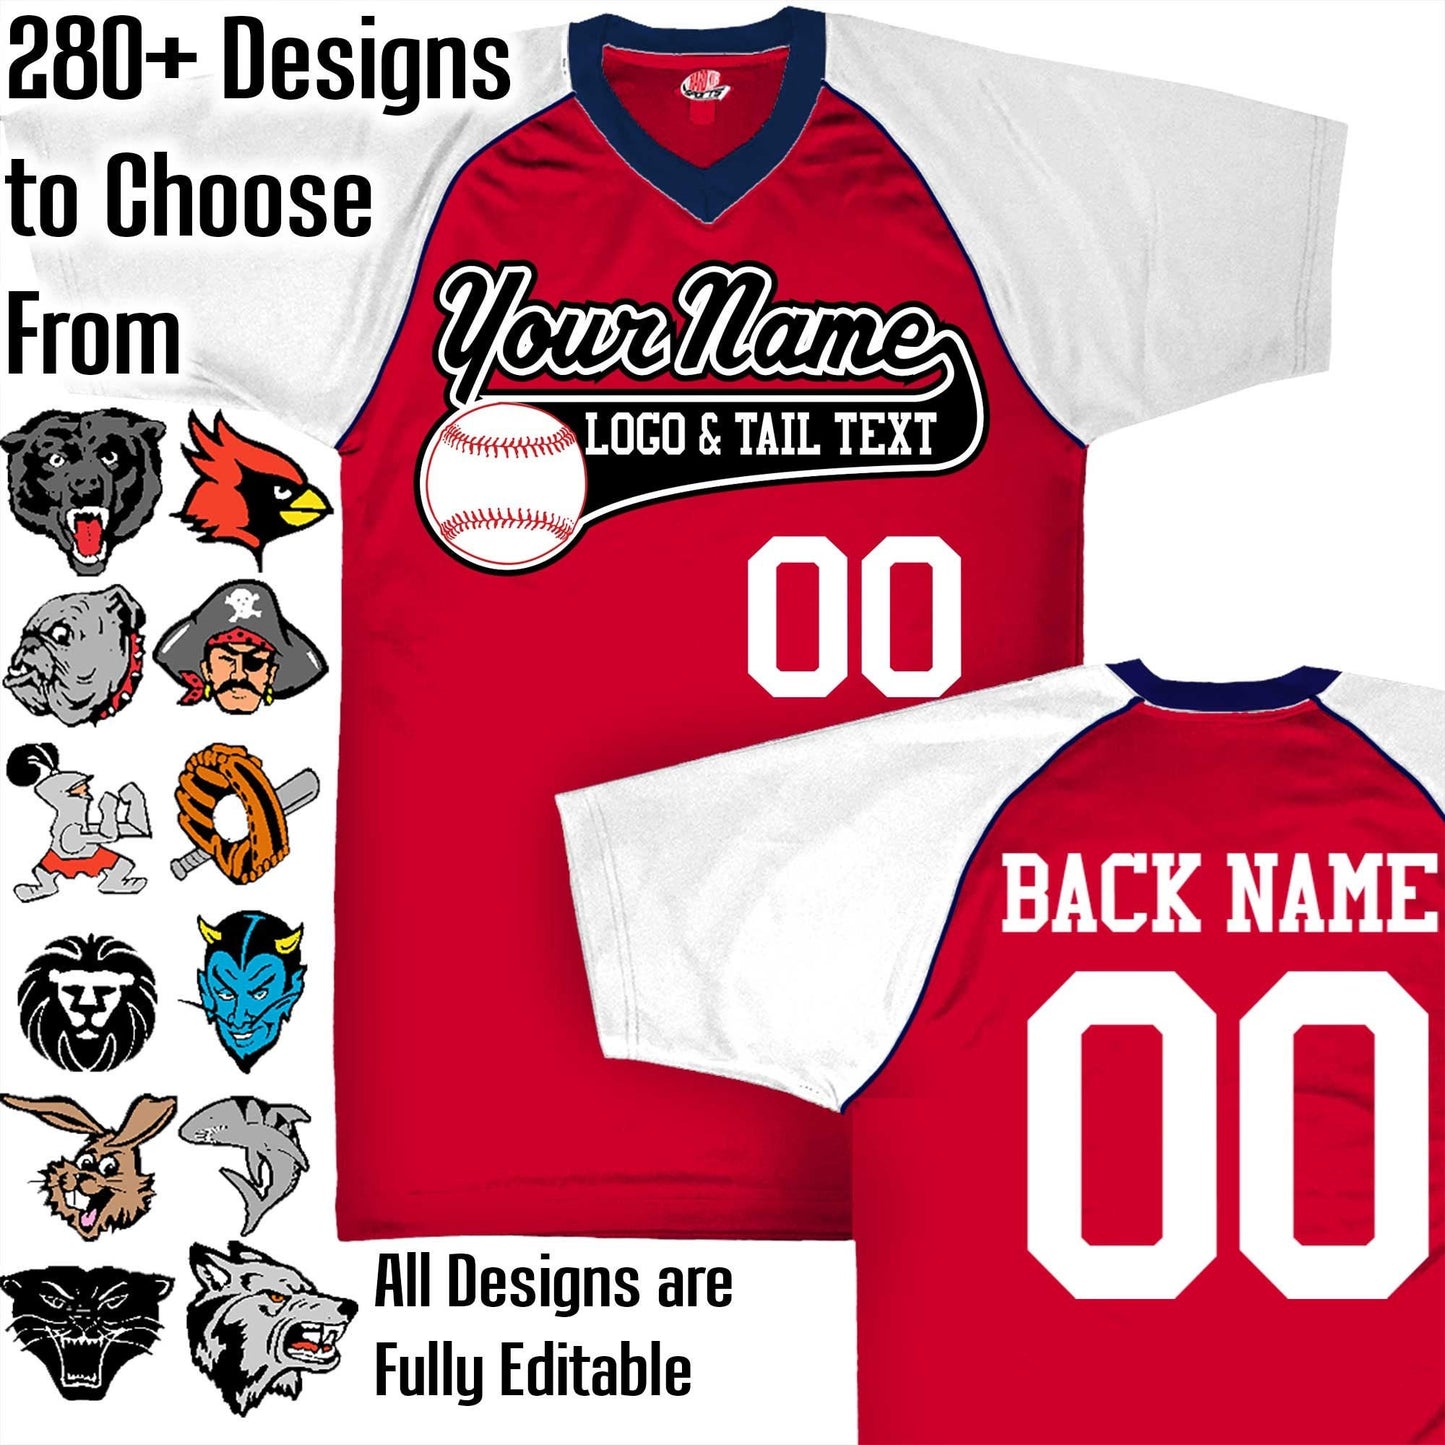 Scarlet Red, White and Navy Blue Customizable Baseball Jersey with Your Team, Player Name and Numbers Custom Baseball Logo